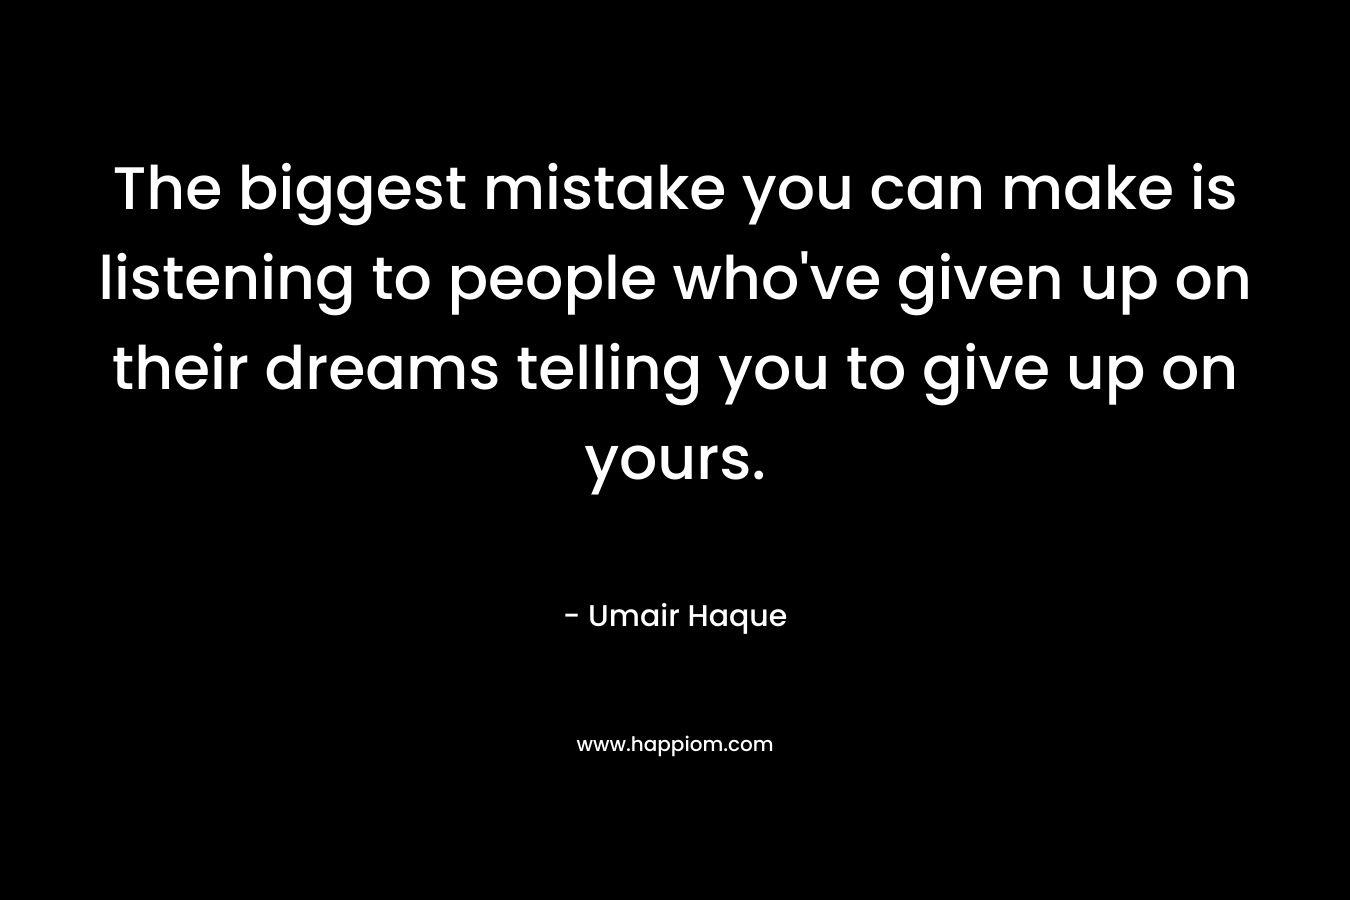 The biggest mistake you can make is listening to people who've given up on their dreams telling you to give up on yours.